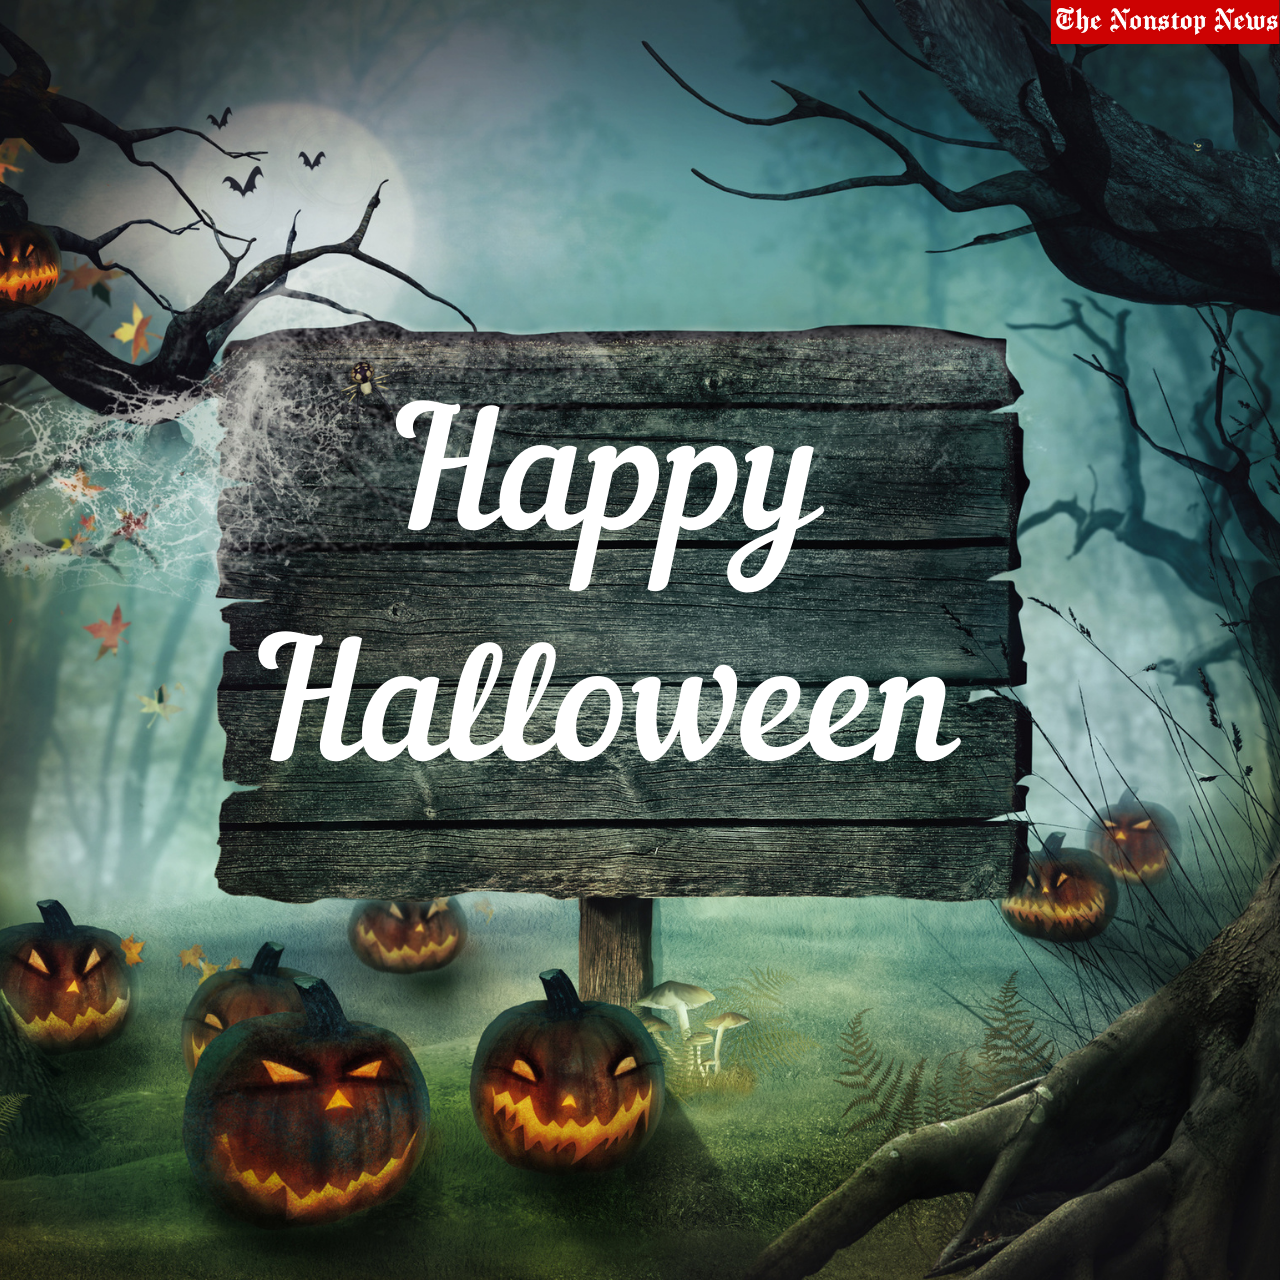 Halloween 2021 Wishes, Greetings, Quotes, Messages, HD Images, and Stickers for Clients